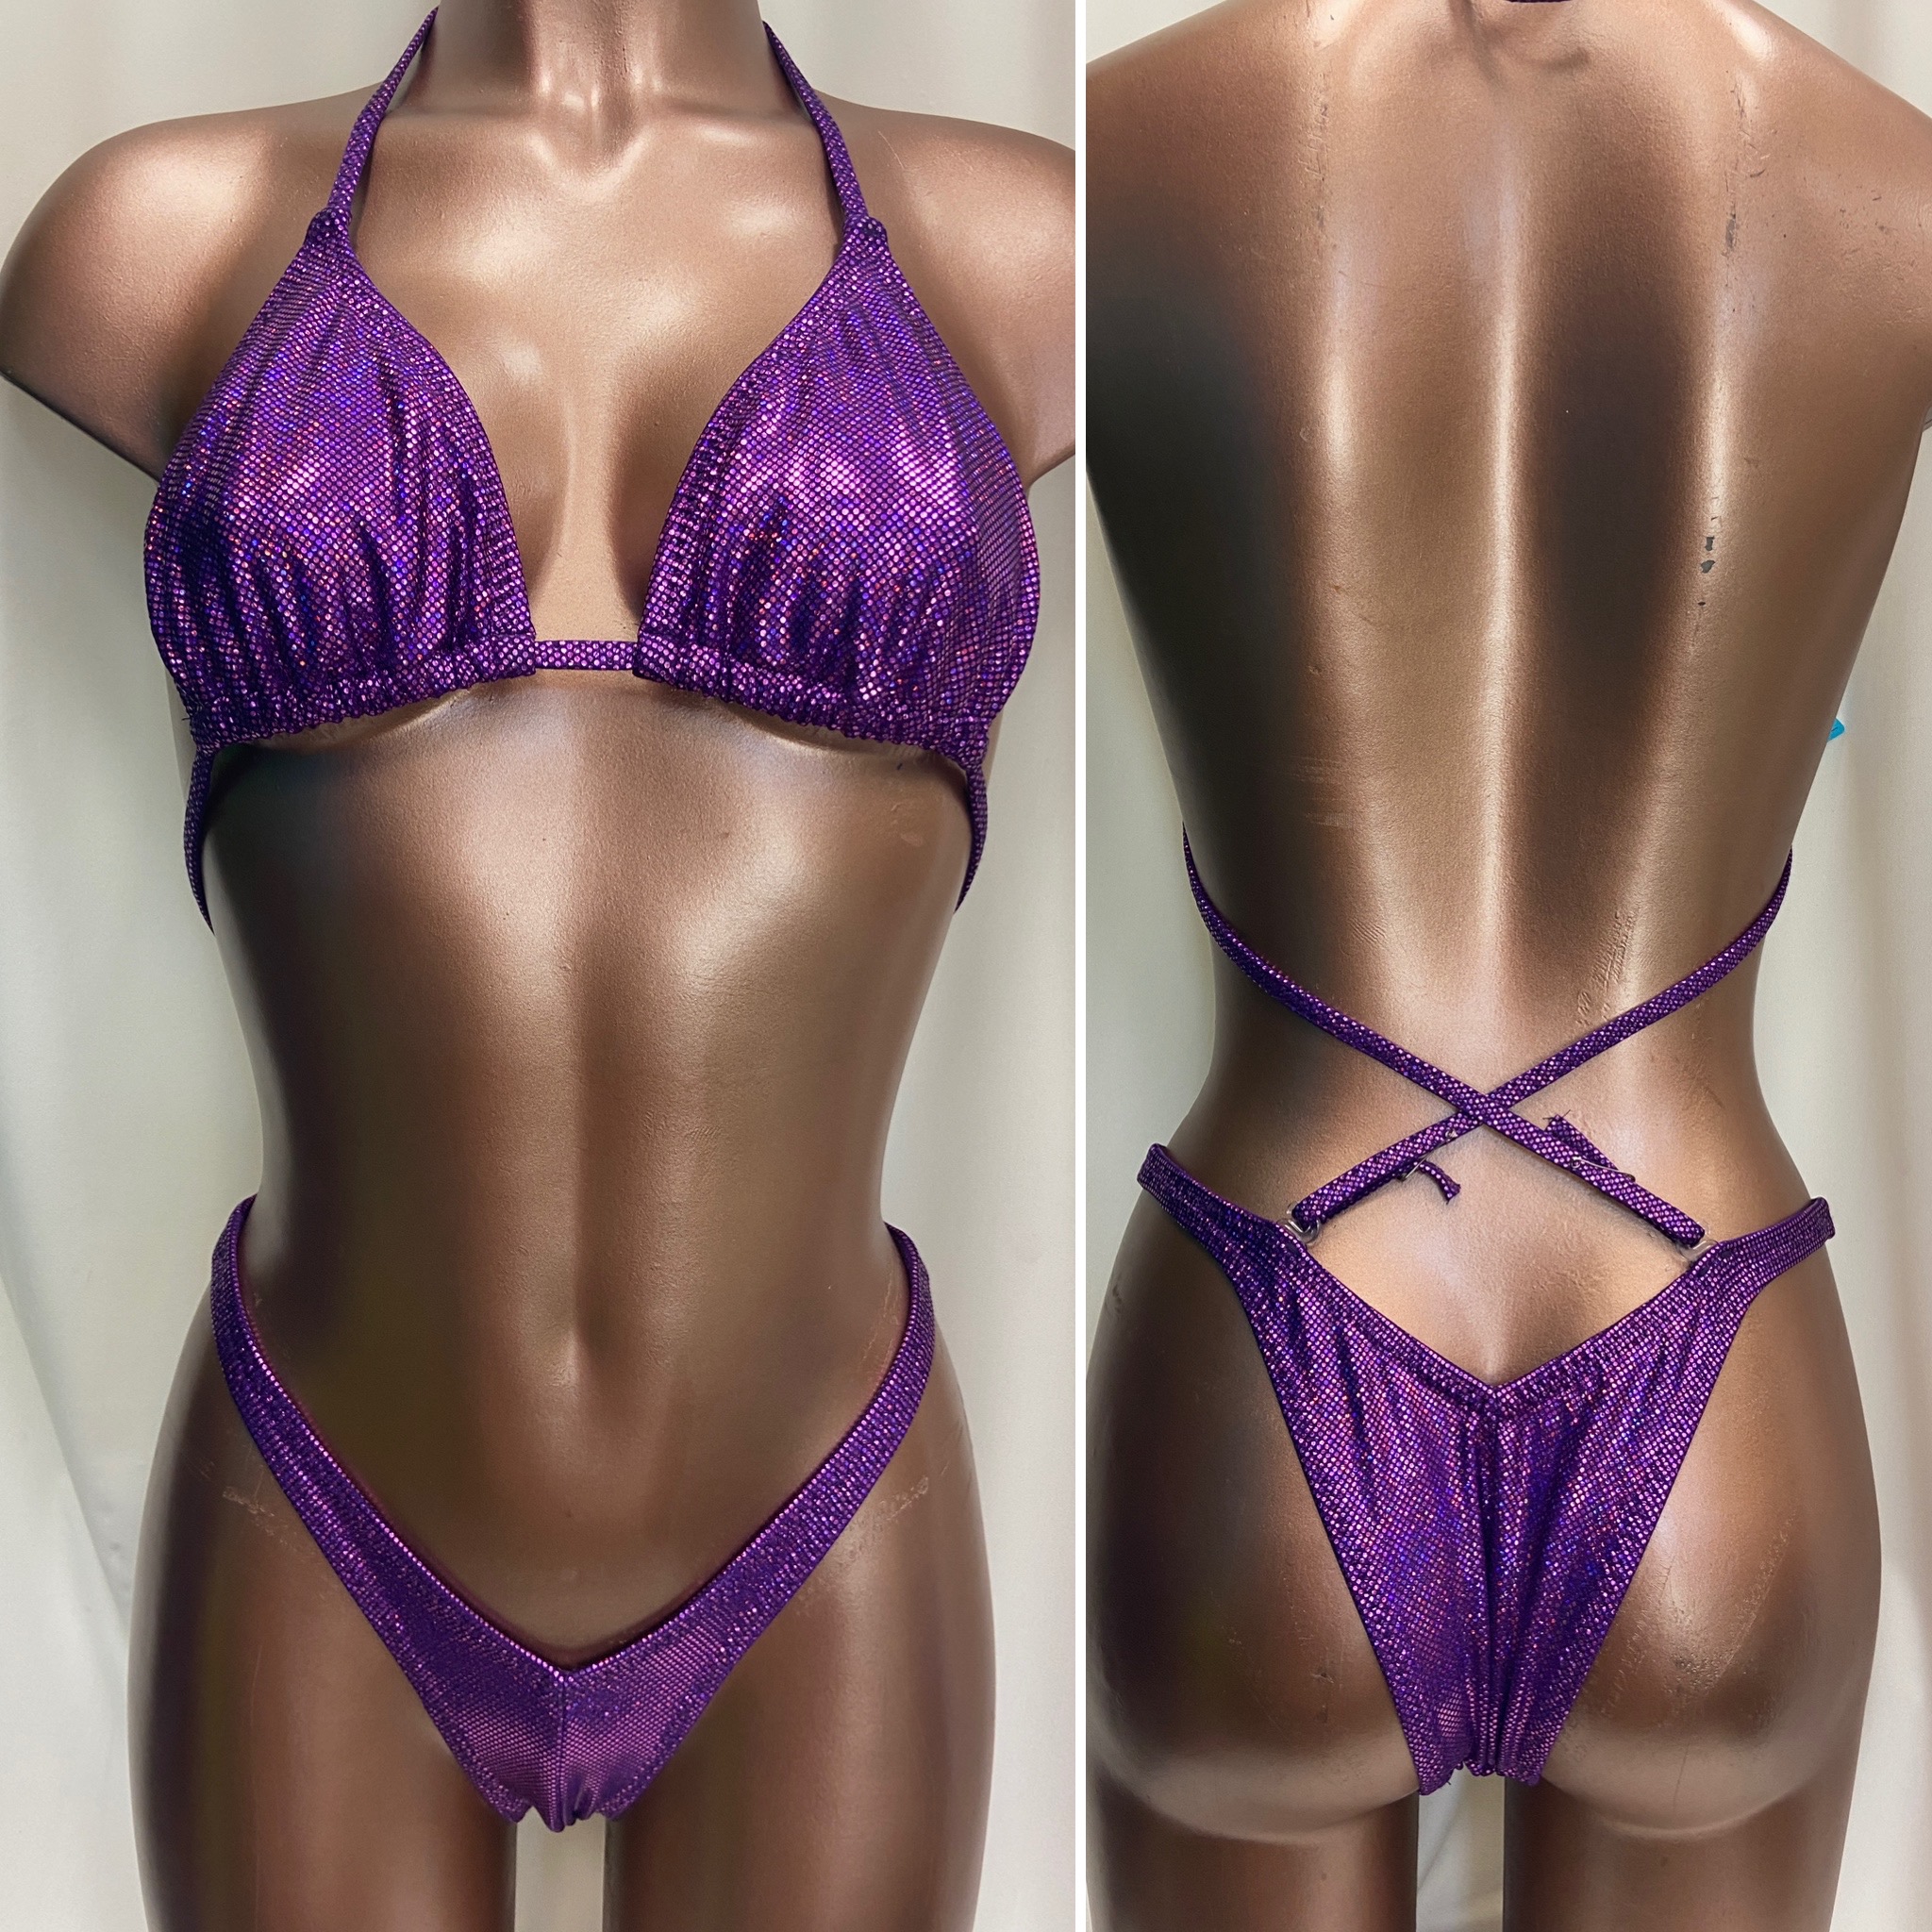 P6004 
$85
B+ sliding top
small front, xsmall back
Amethyst hologram 